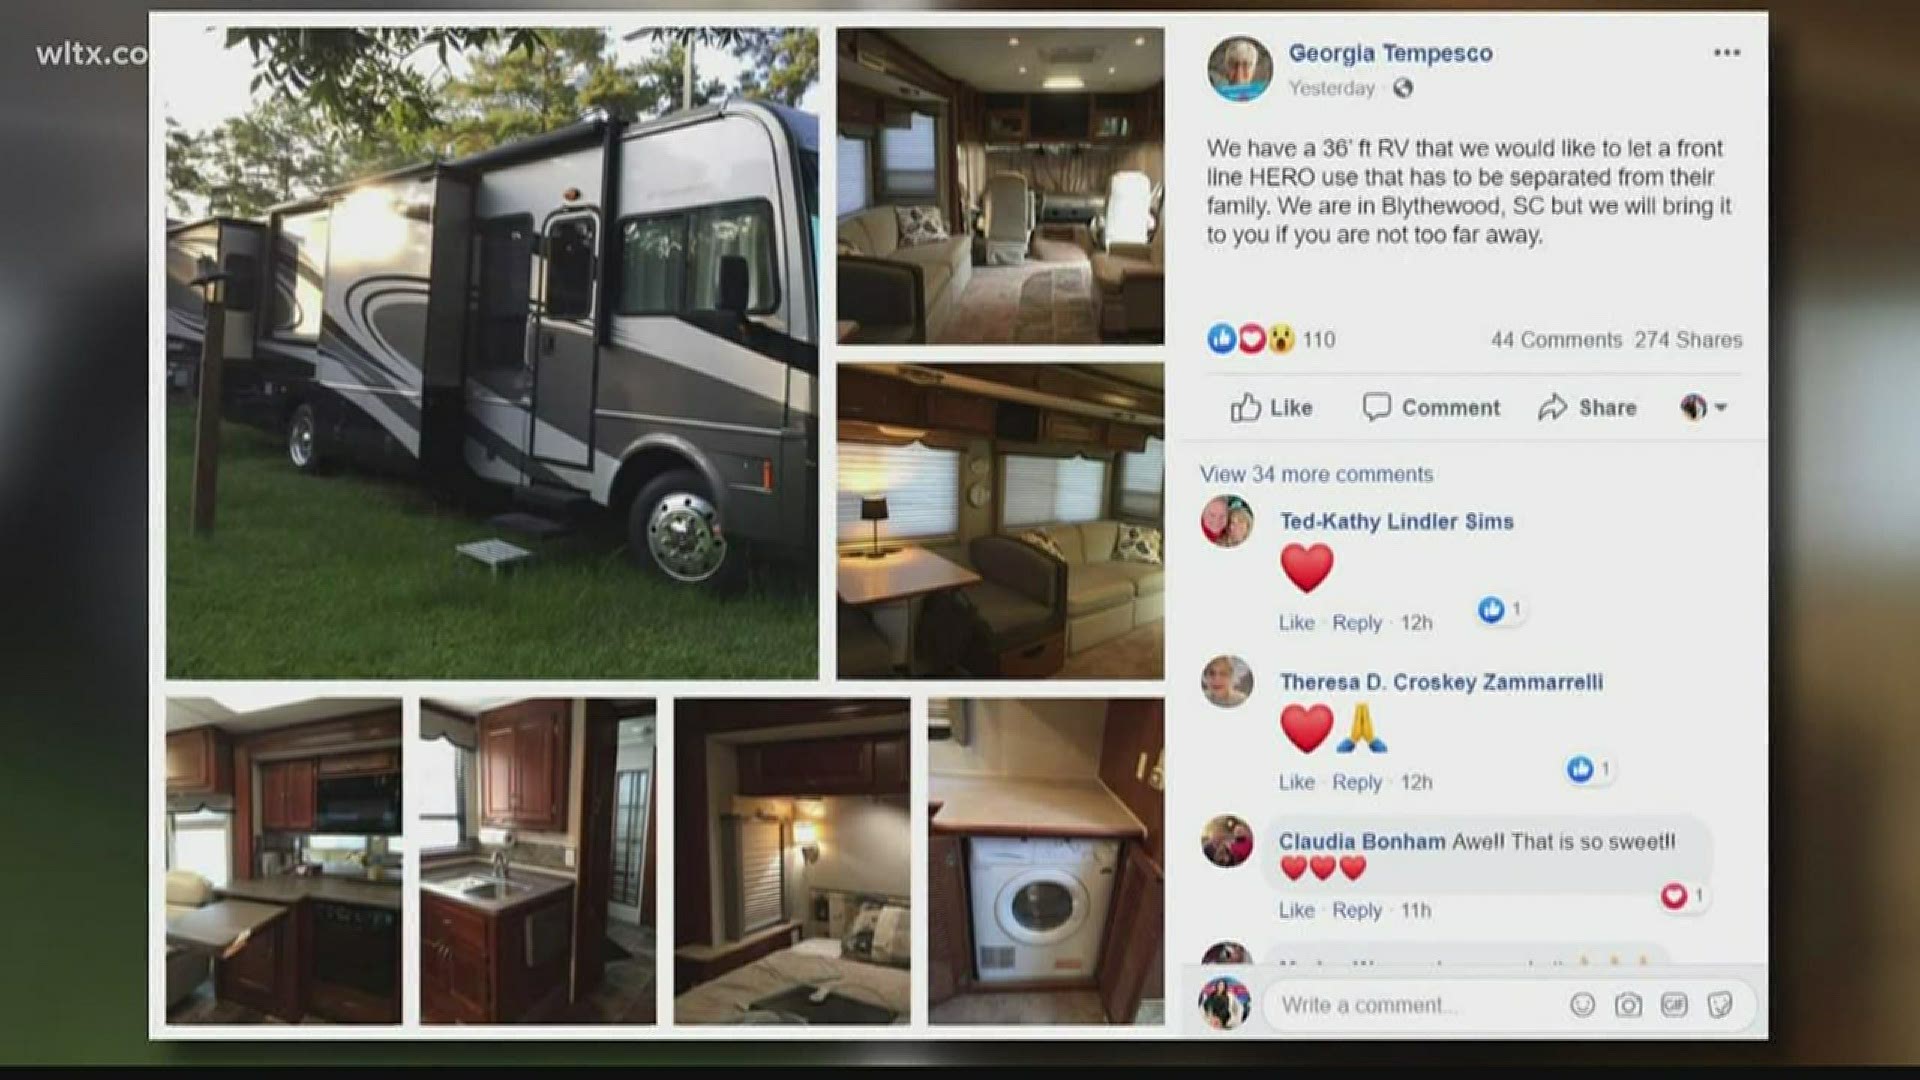 RV owners are offering their RVs for first responders to doctors who have to quarantine from family